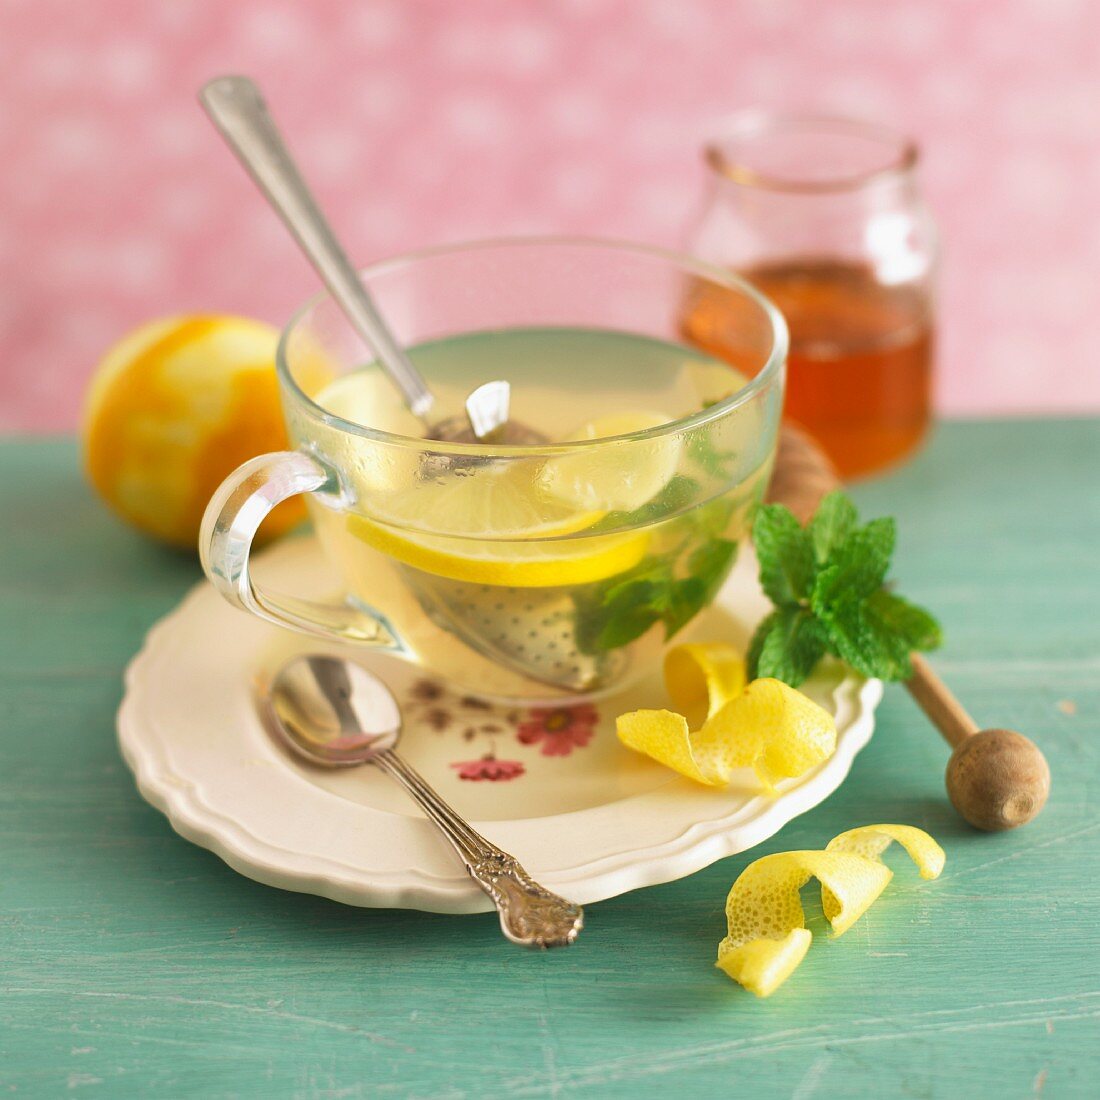 Ginger and lemon tea in a glass teacup